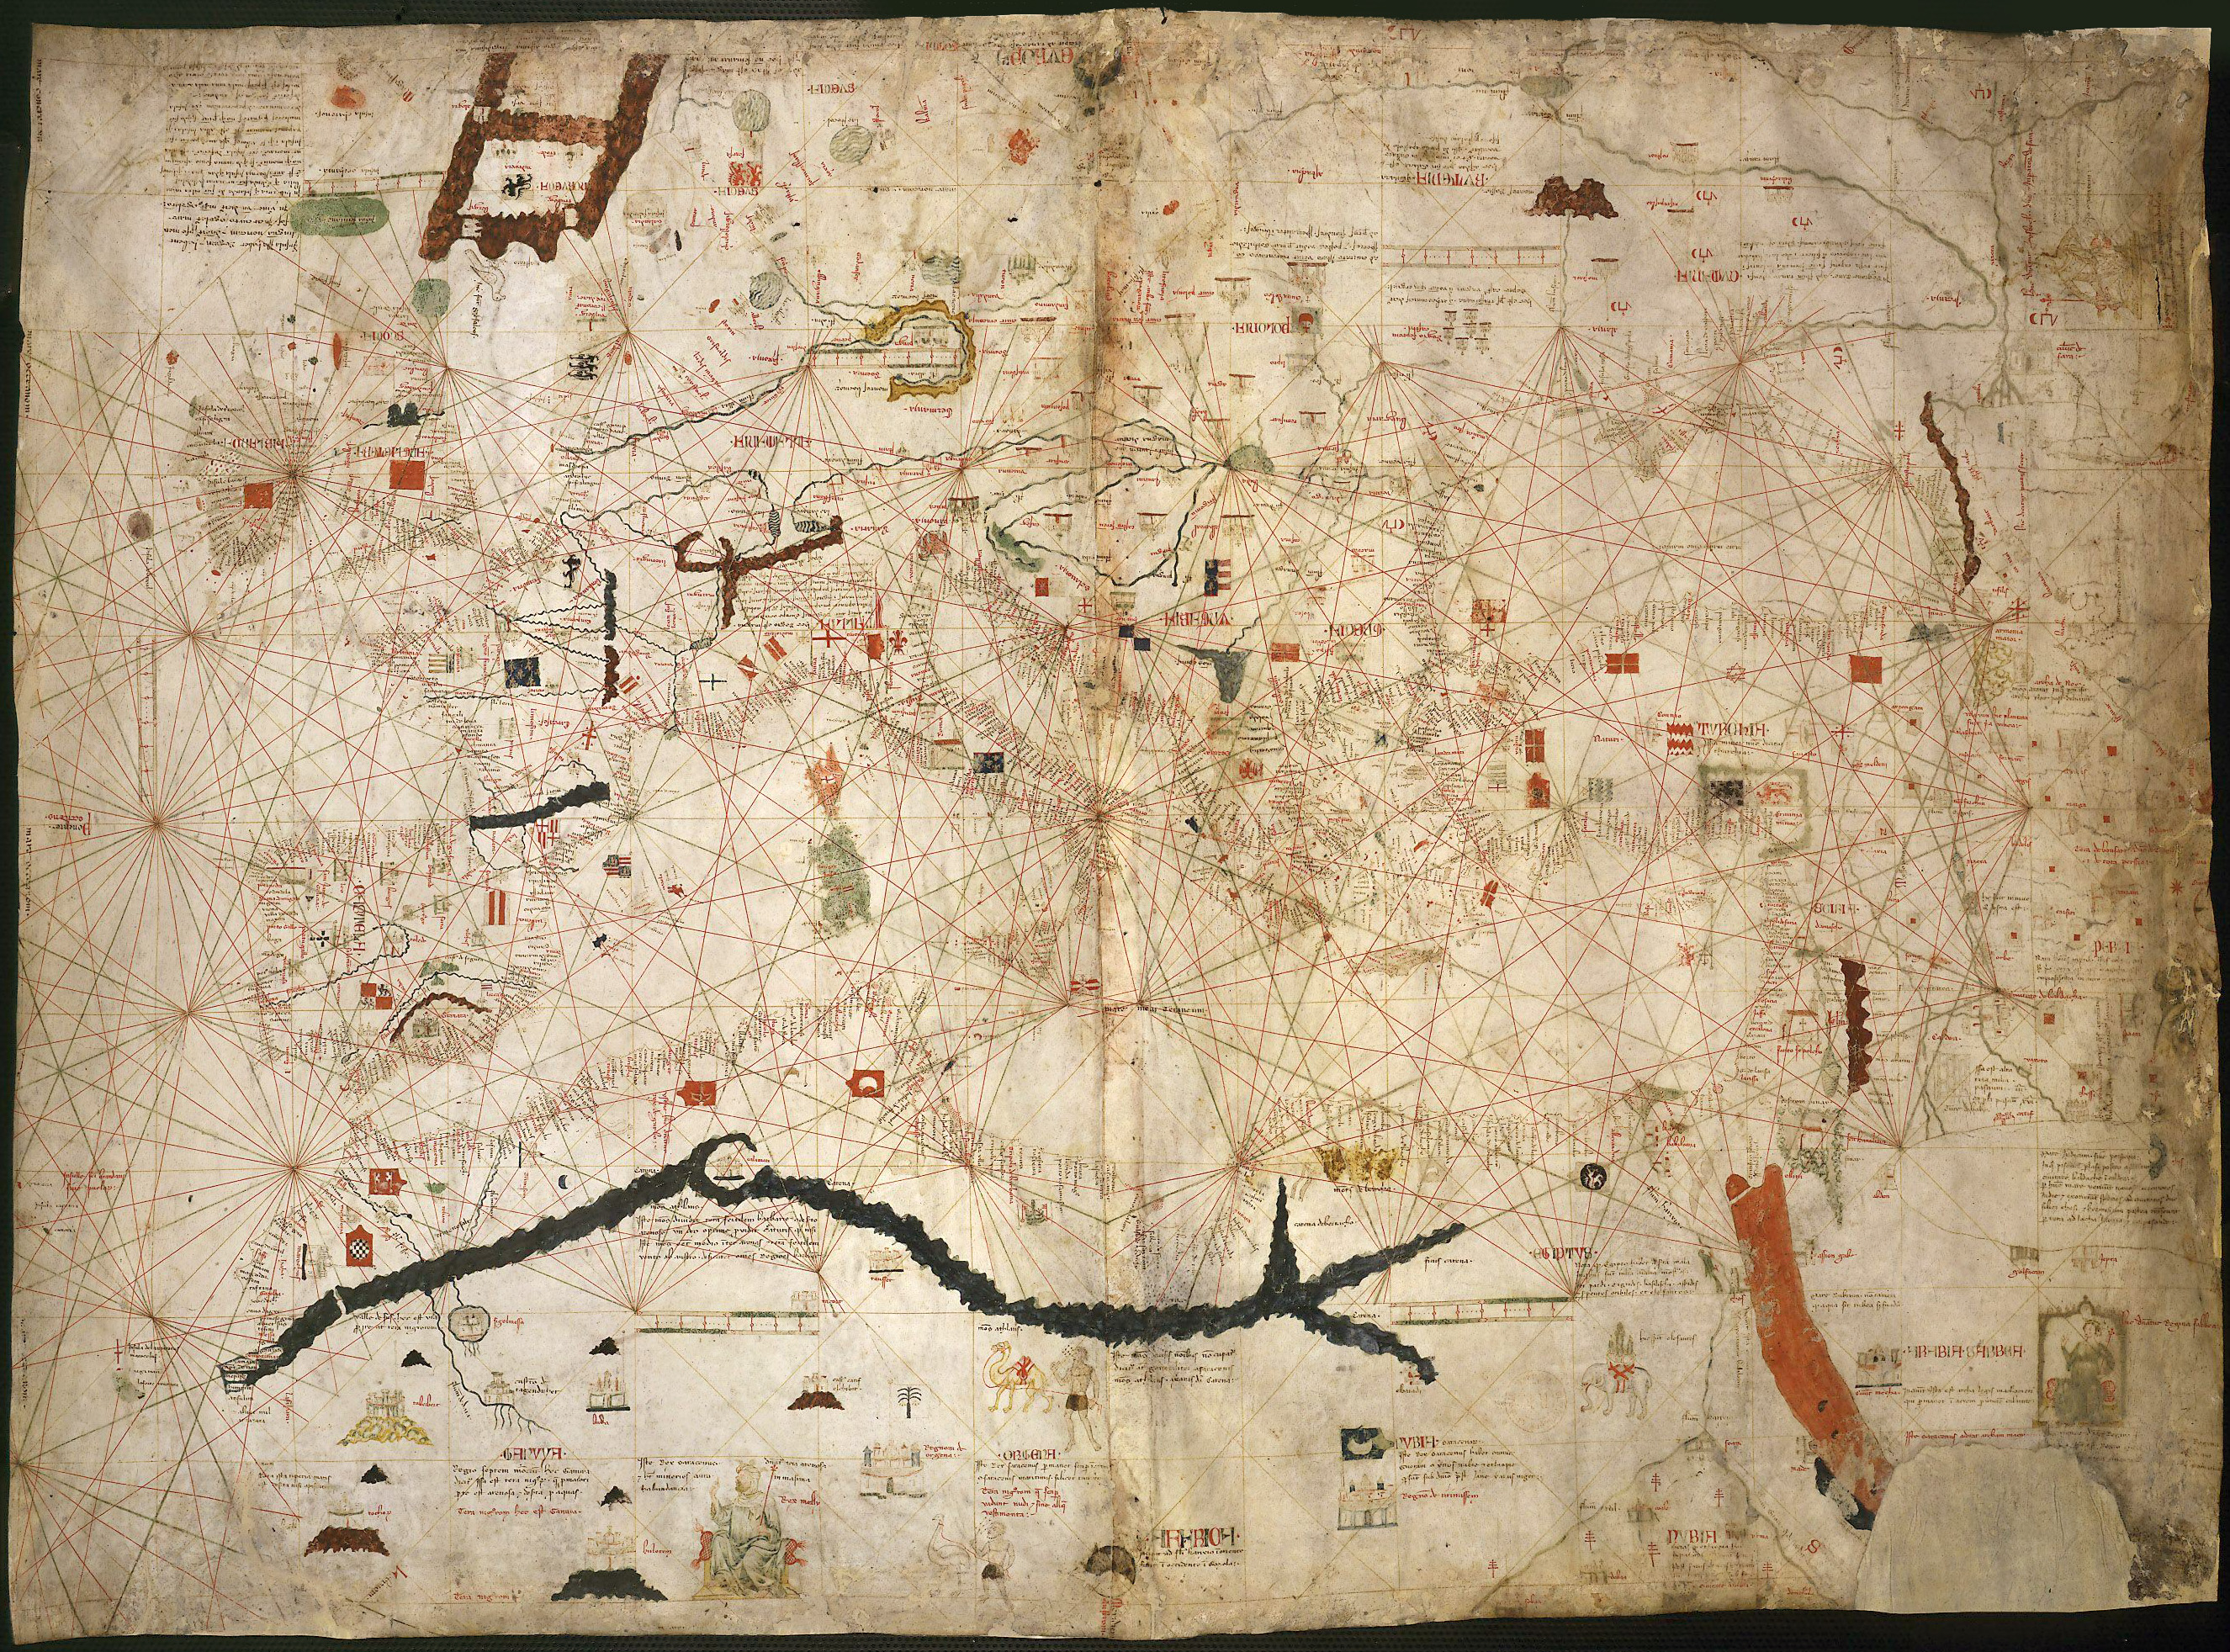 map_of_angelino_dulcert_cropped